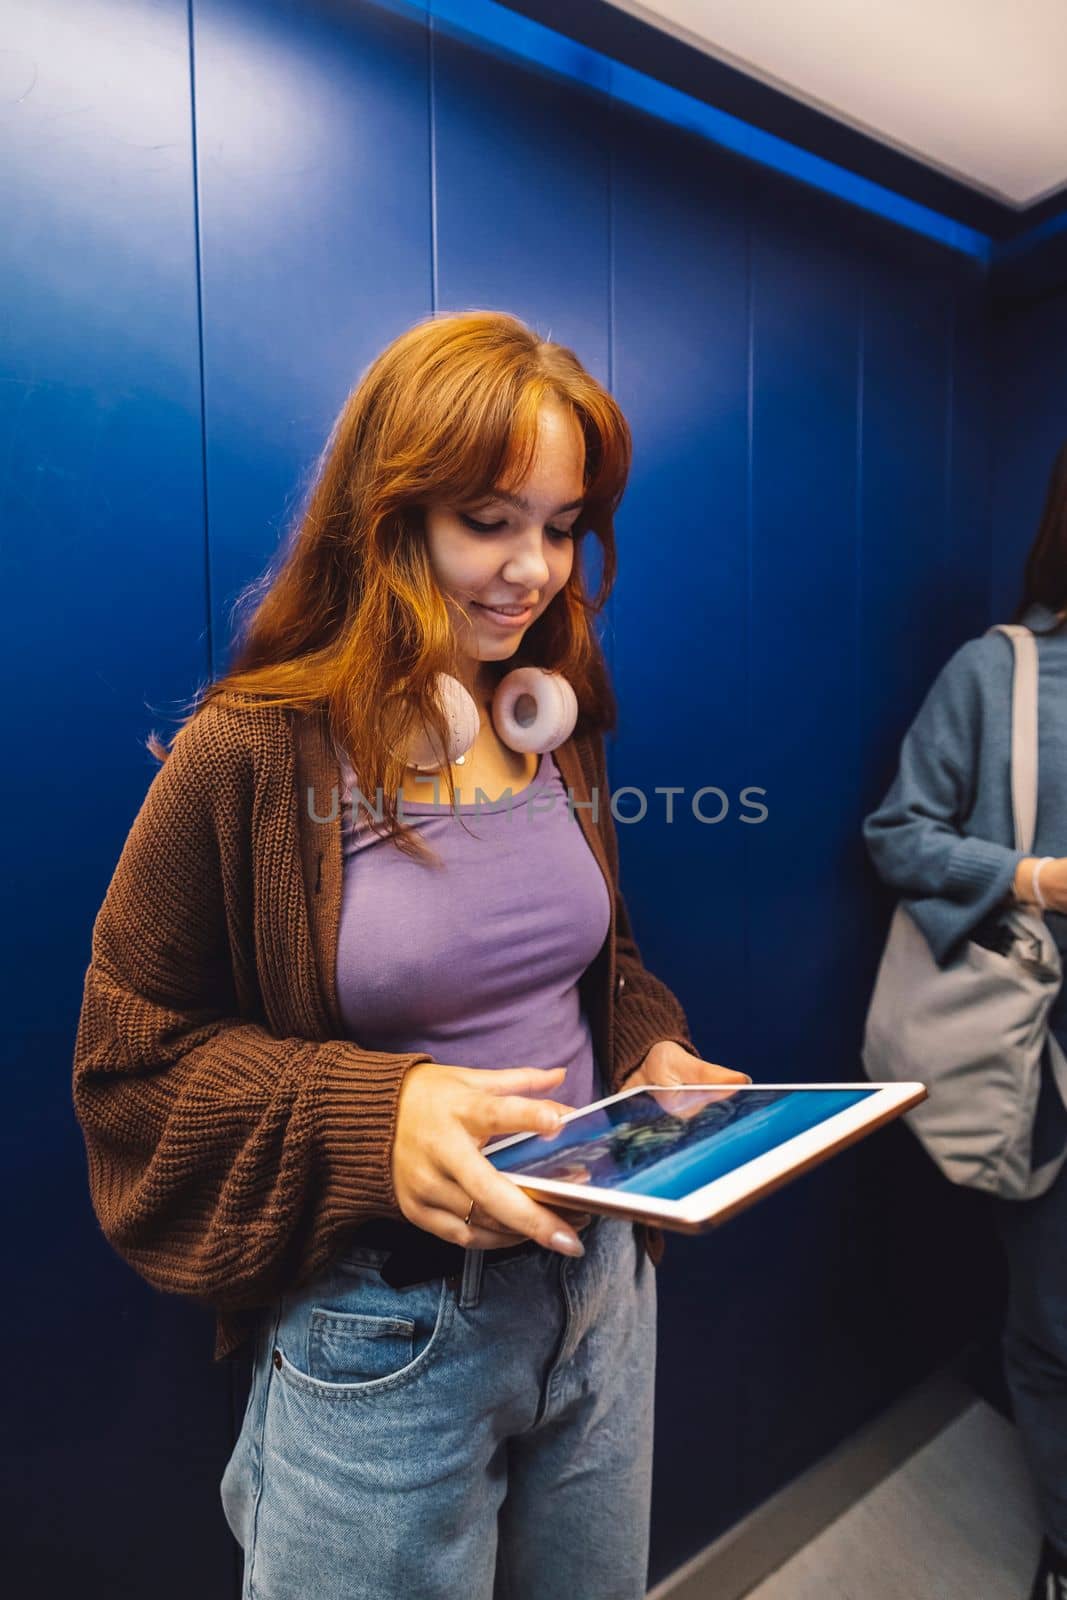 Vertical photo of young caucasian woman with handphones around her neck, holding a dgital tablet while standing in an elevator.